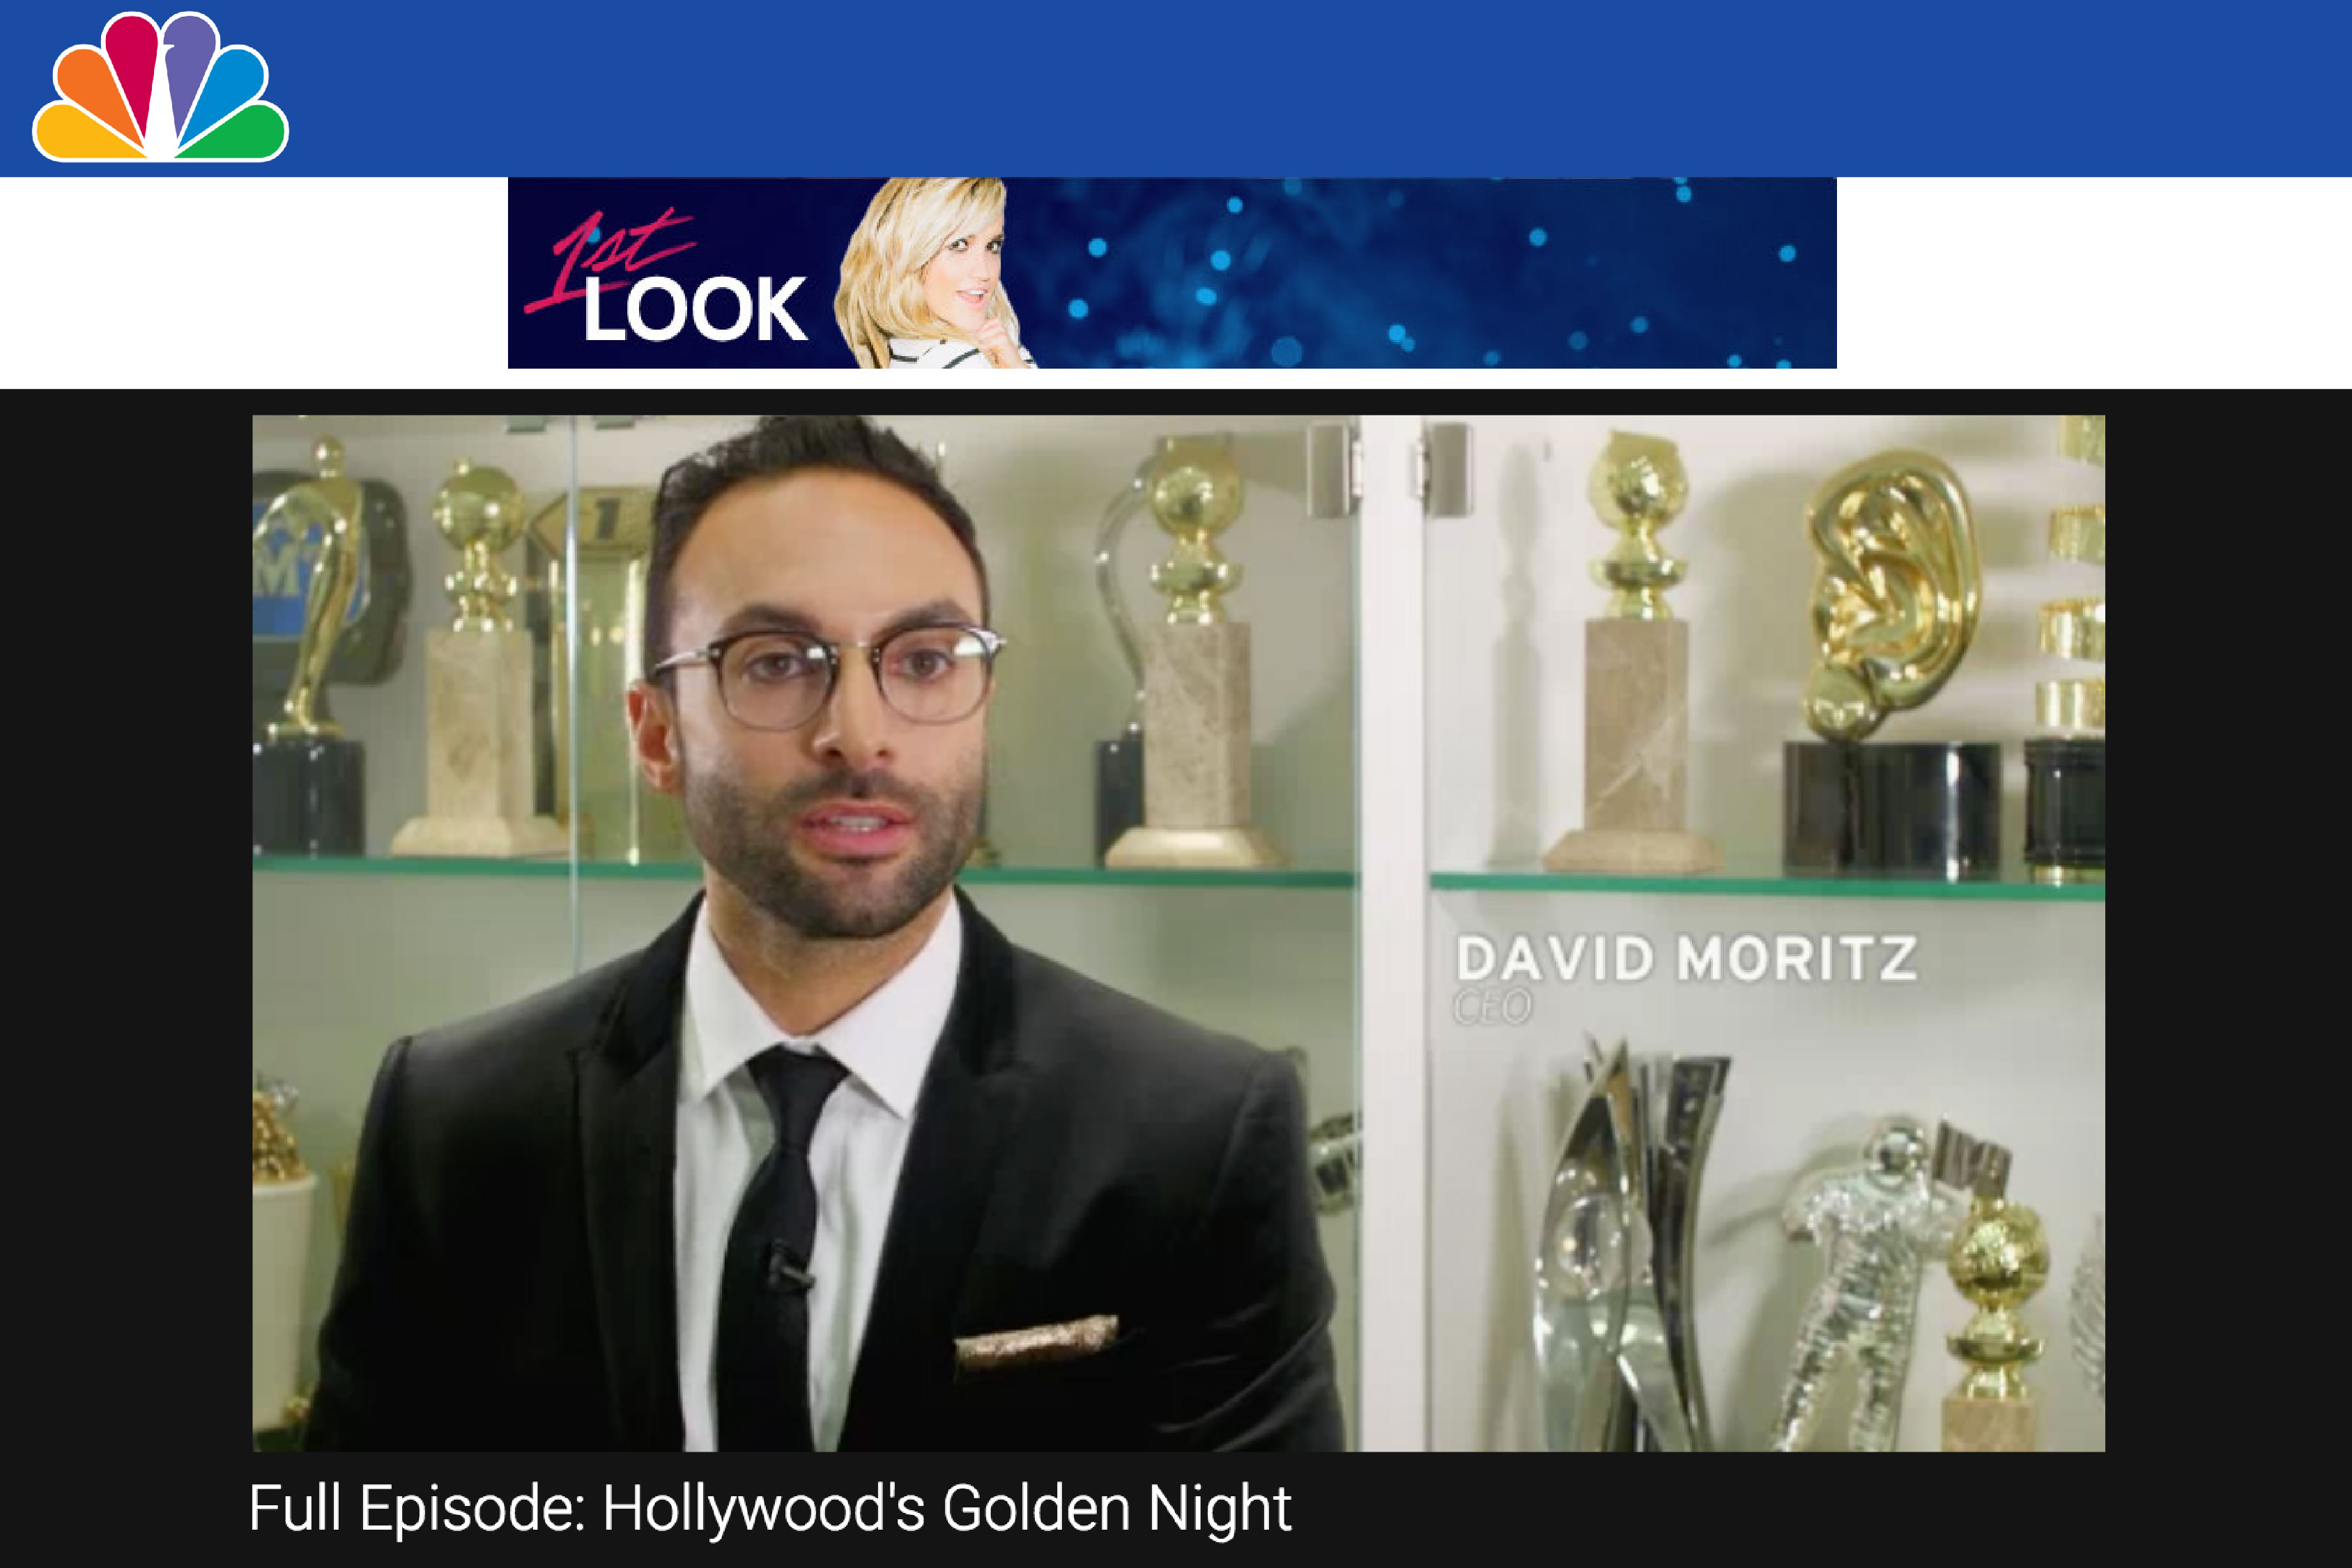 NBC's 1st Look Explores How Society Awards Creates the Golden Globe Statuette